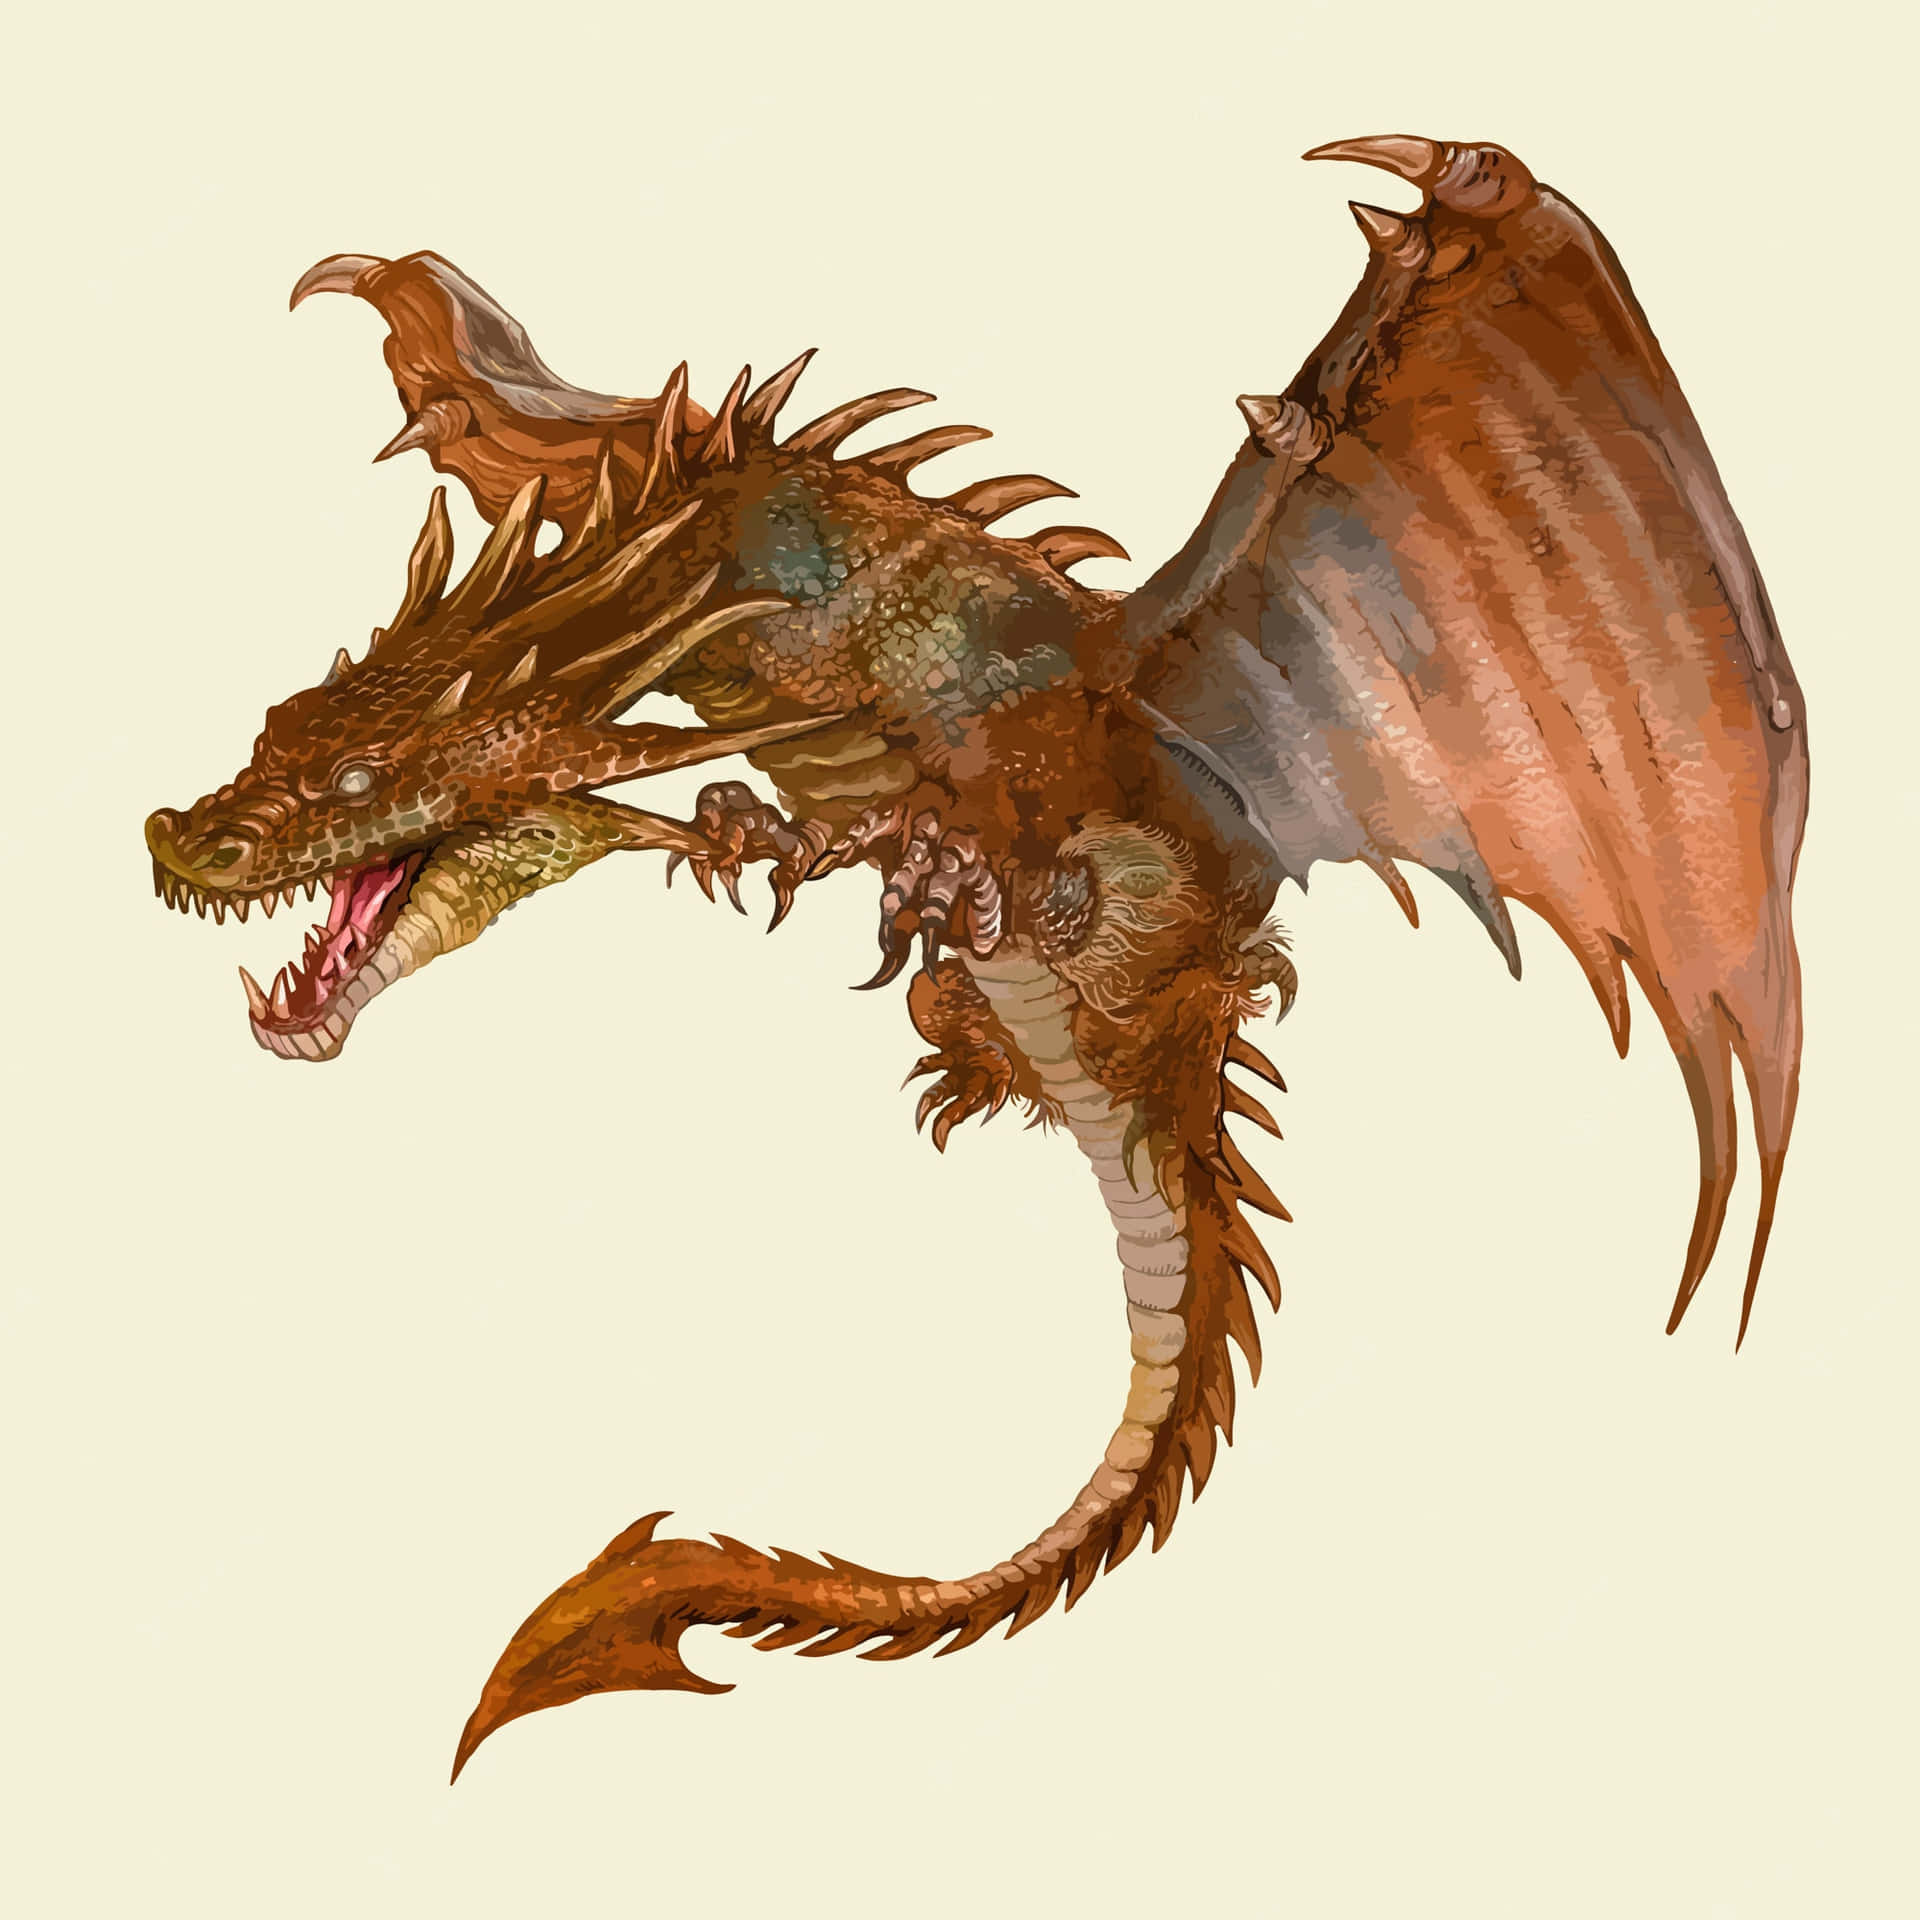 A detailed profile of a majestic and powerful dragon